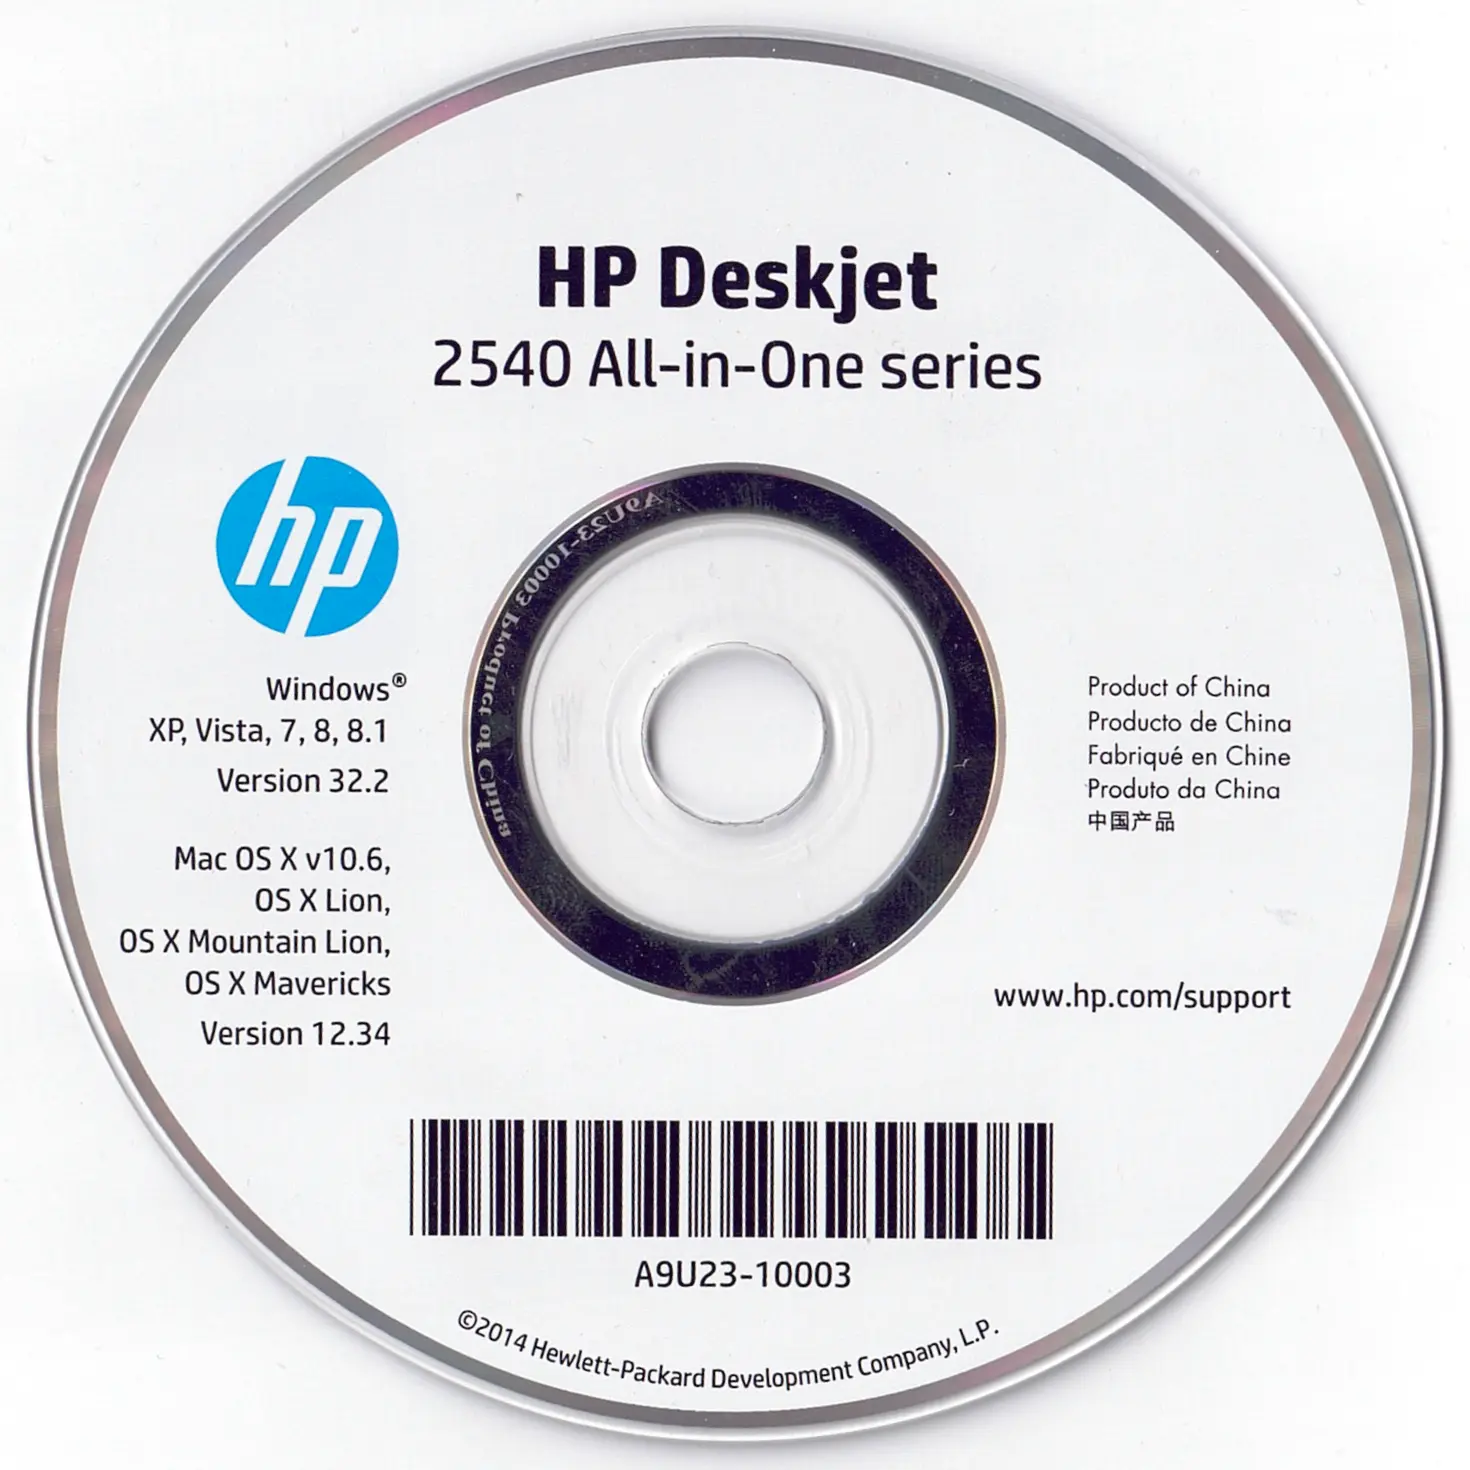 How to install hp 2540 printer driver - step-by-step guide